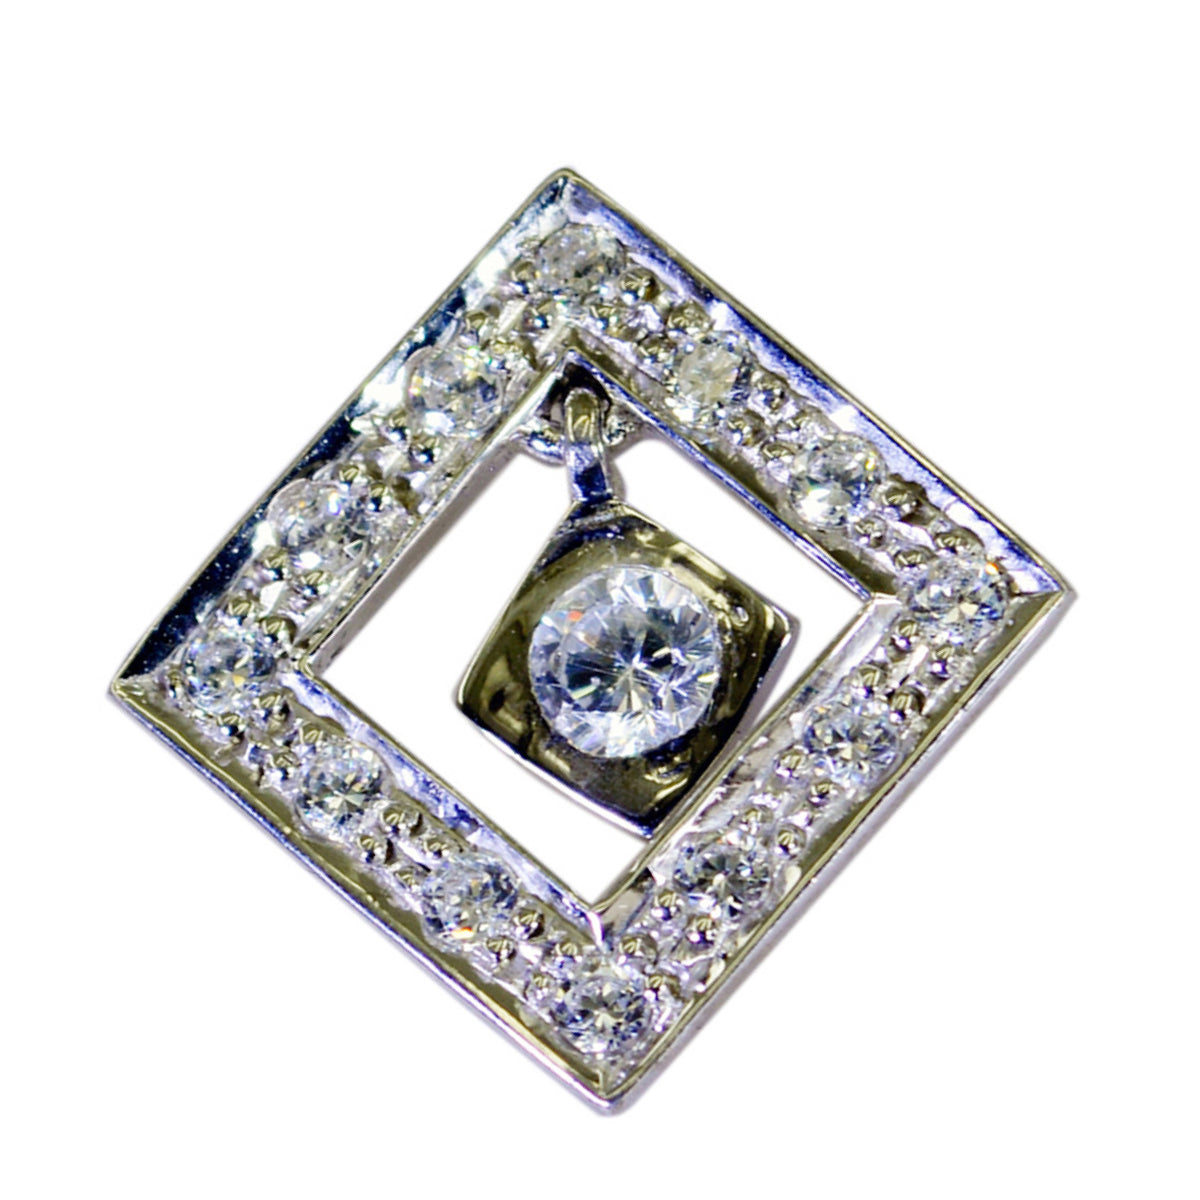 Riyo Real Gems Round Faceted White White Cz Silver Pendant Gift For Engagement